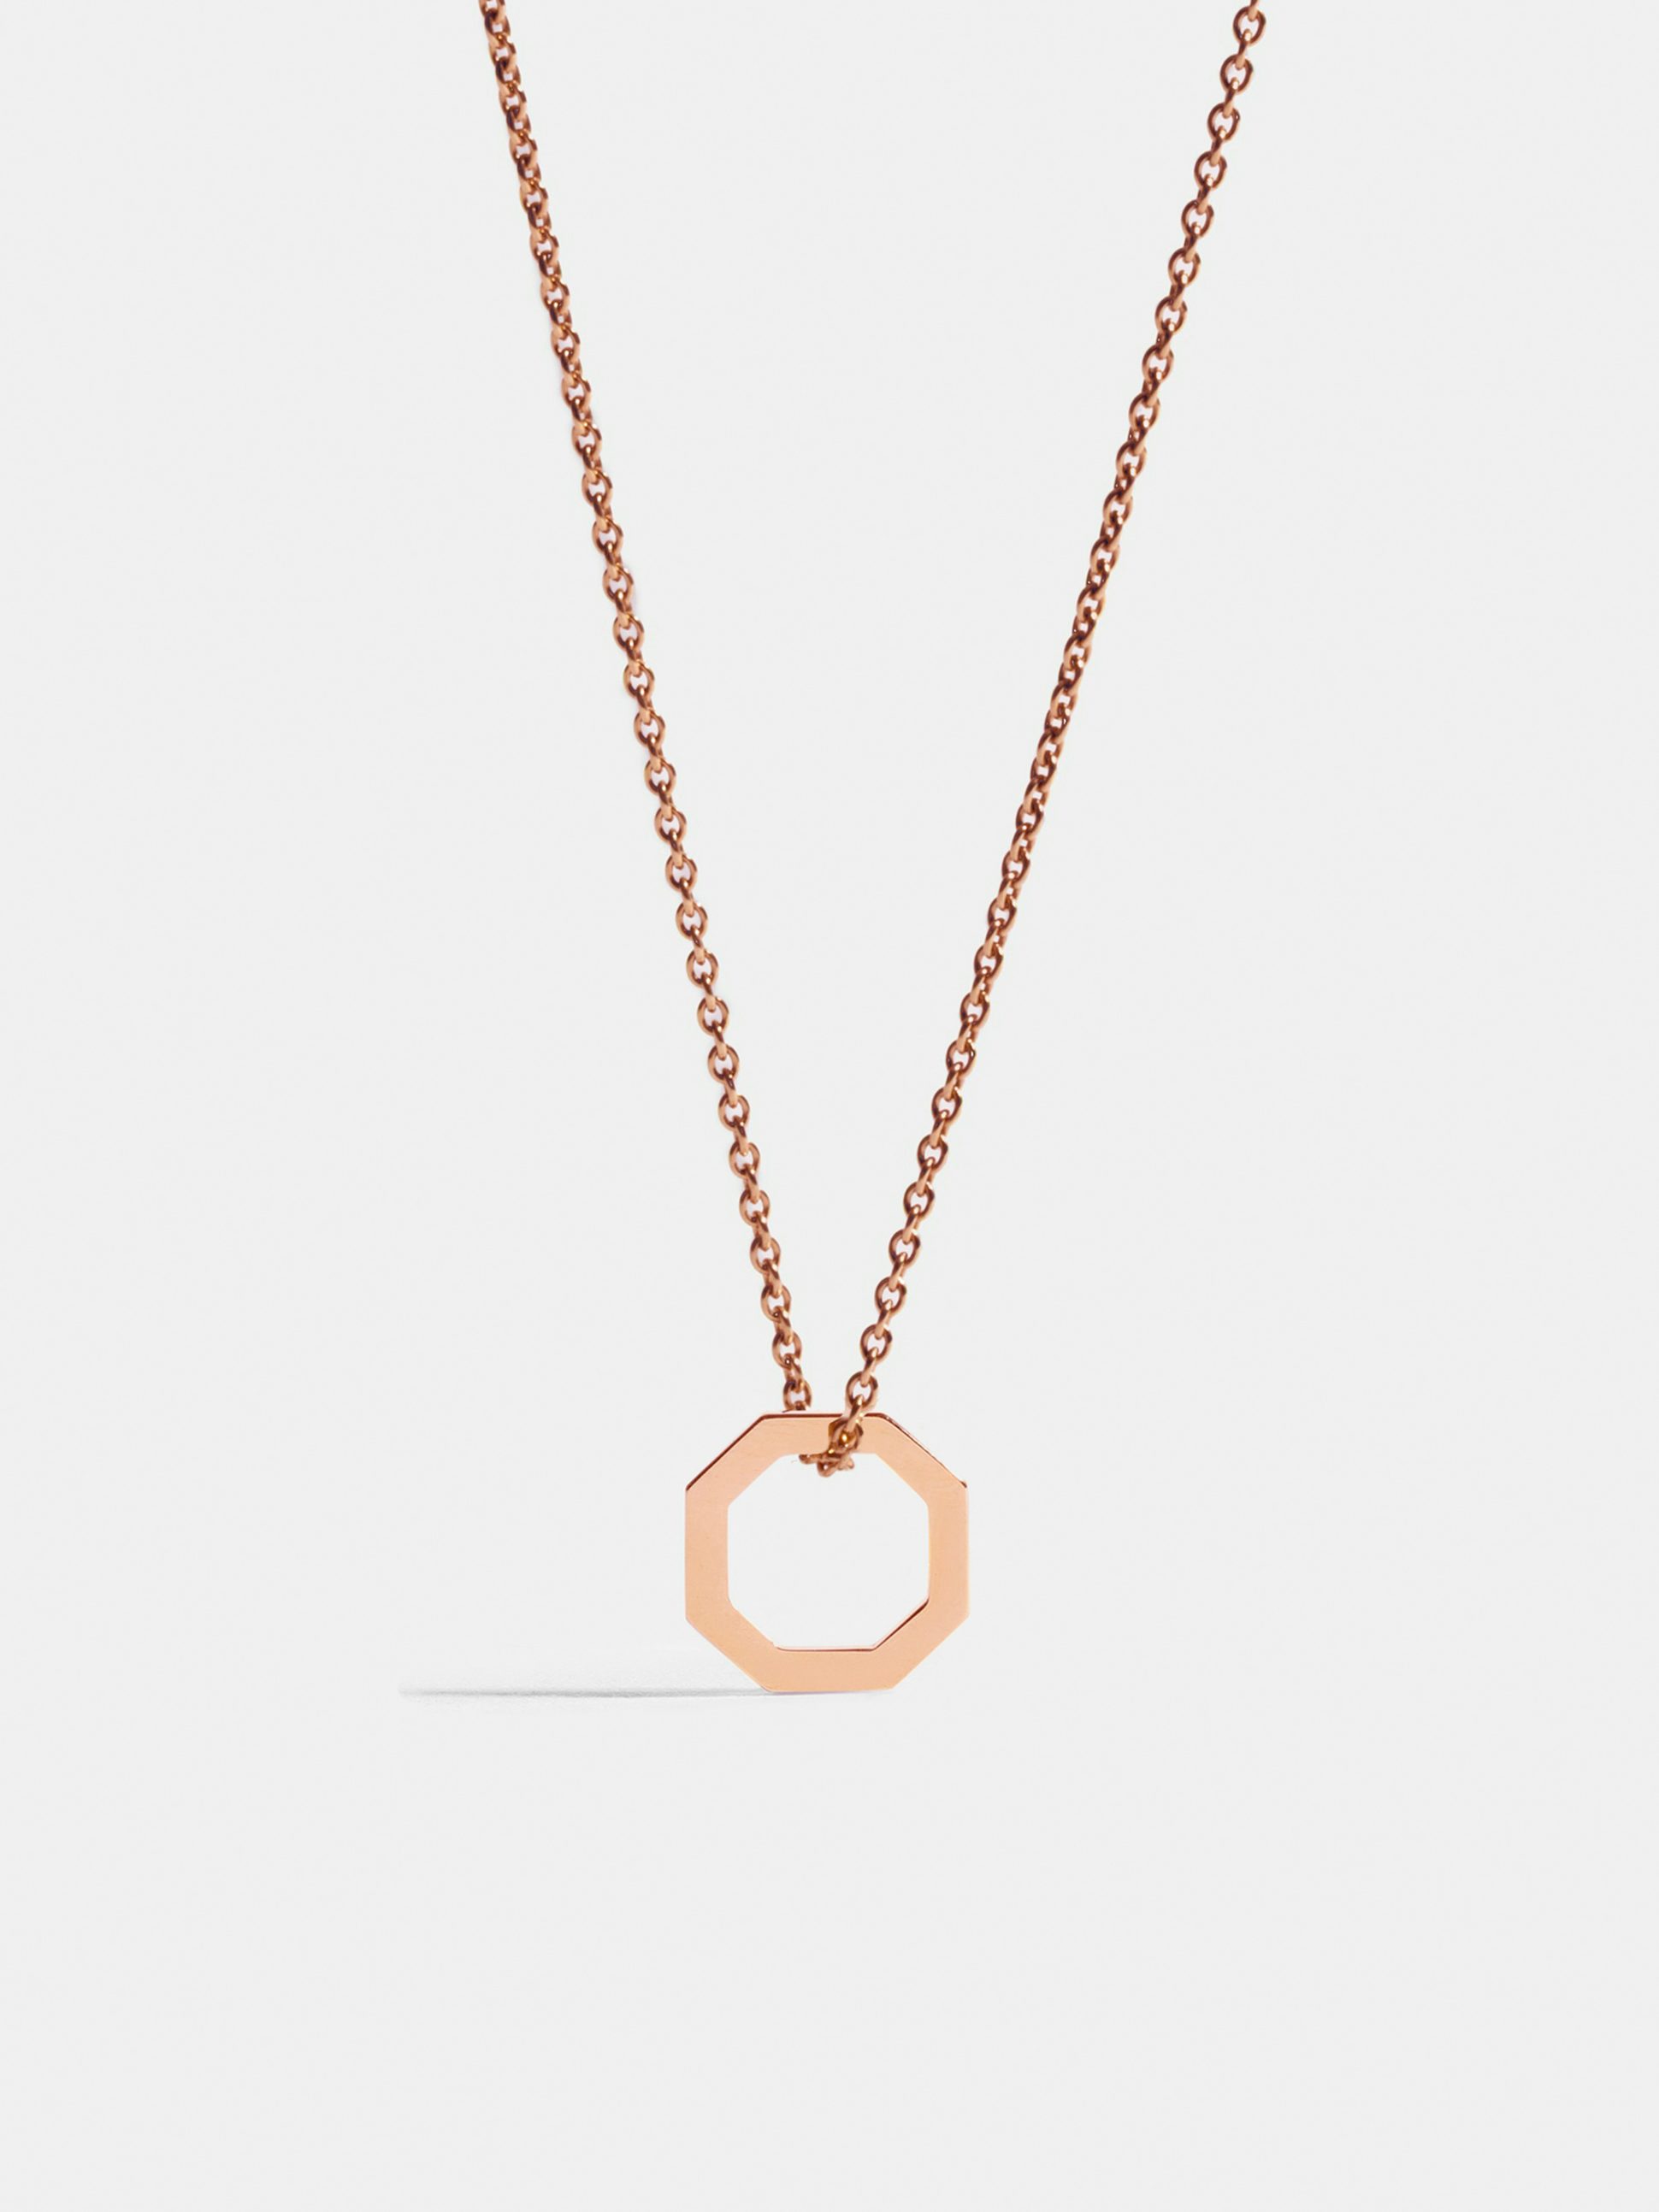 Octogone 10mm pendant in 18k Fairmined ethical rose gold, on a chain.